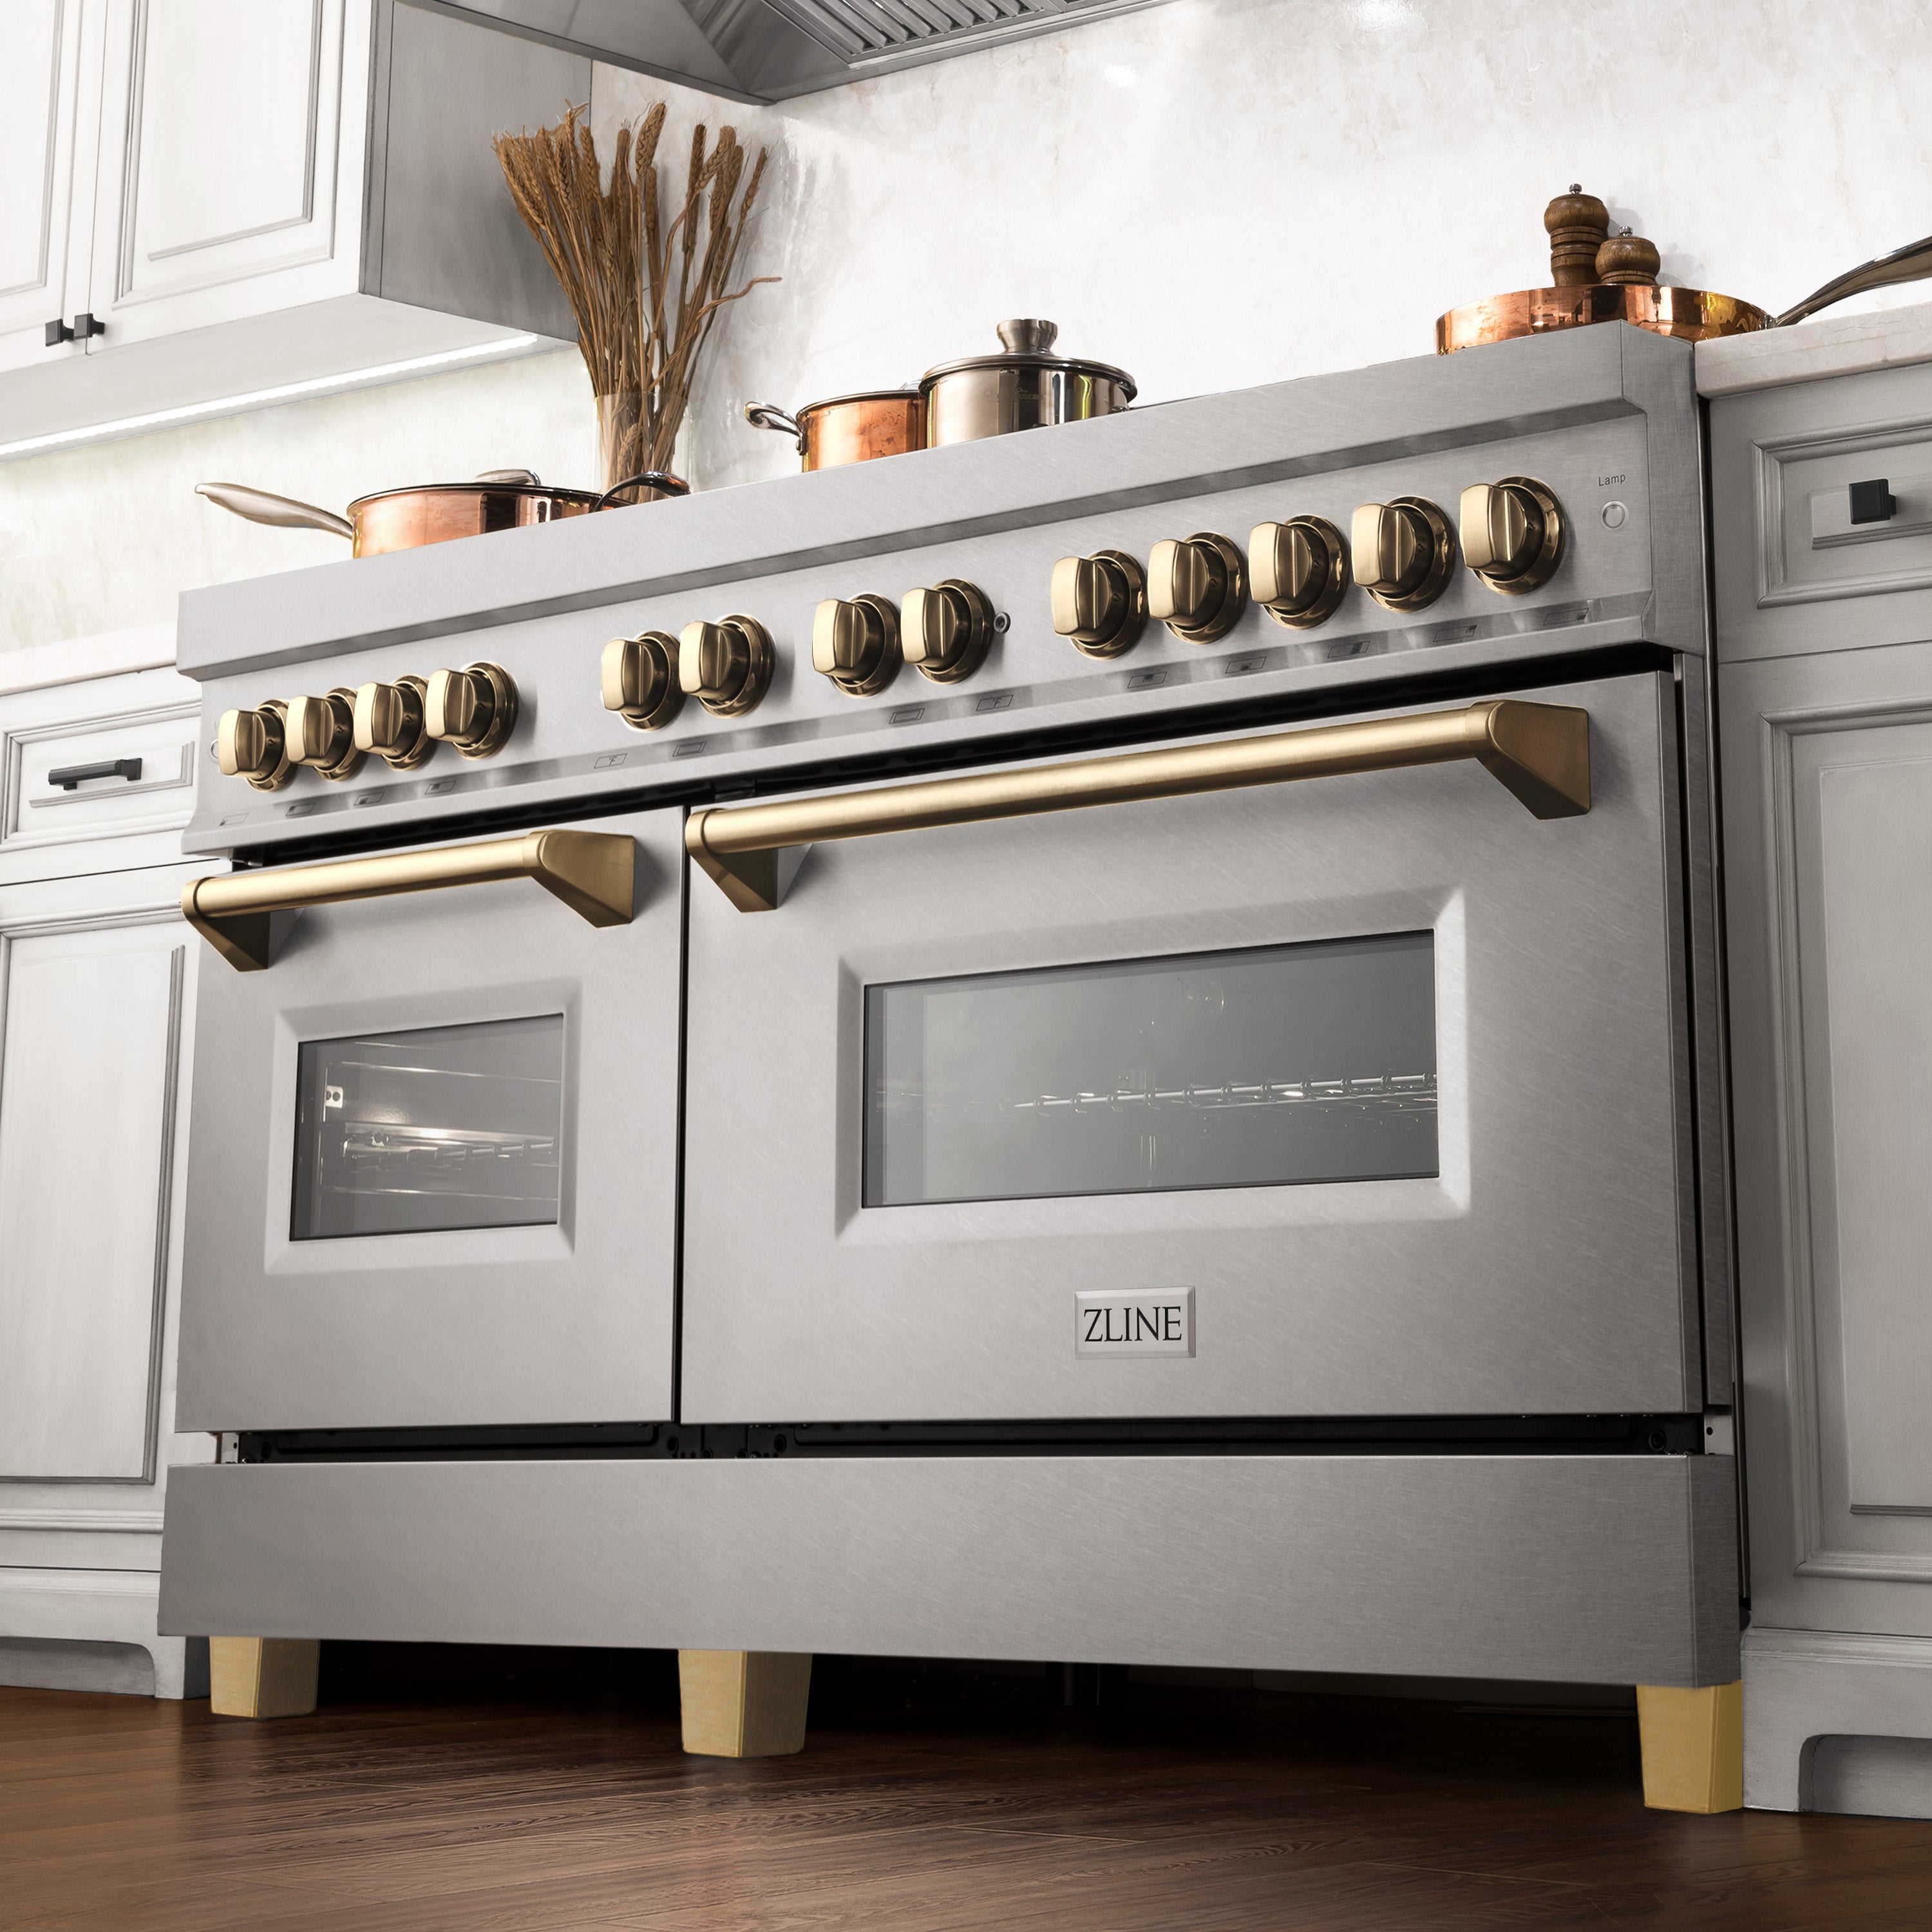 ZLINE Autograph Edition 60" 7.4 cu. ft. Dual Fuel Range with Gas Stove and Electric Oven in DuraSnow Stainless Steel with Gold Accents (RASZ-60-G)